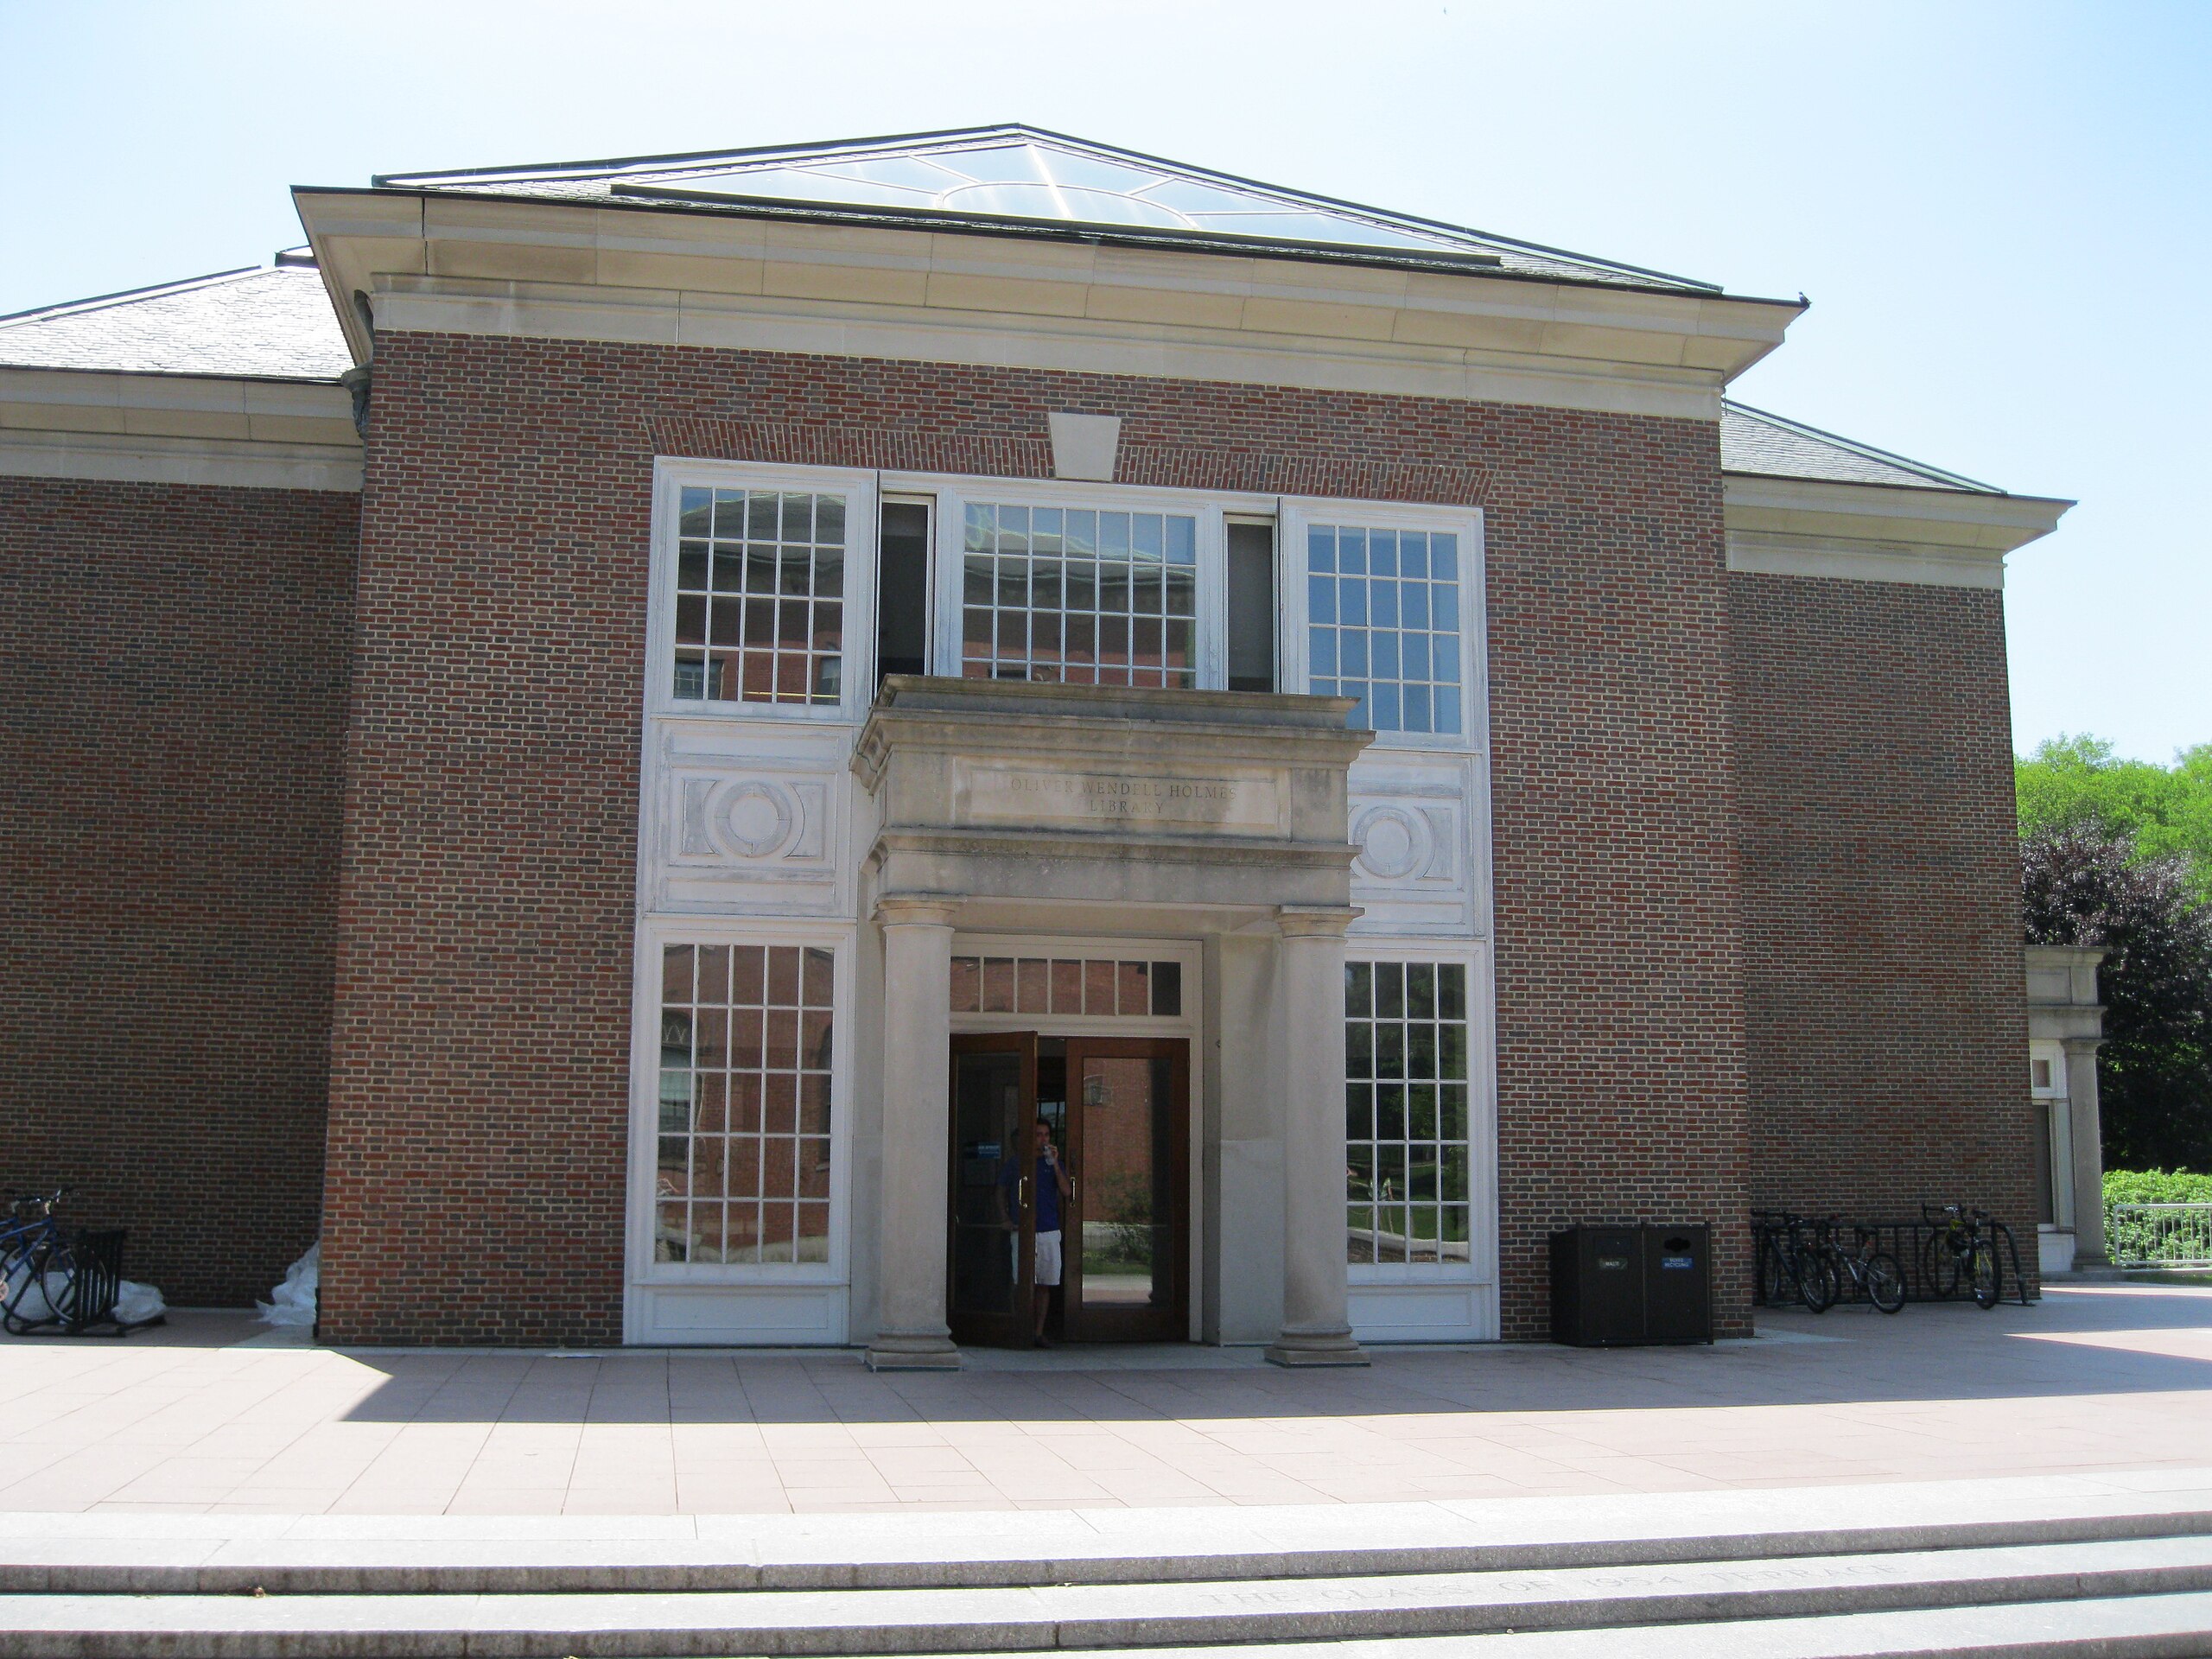 File:Oliver Wendell Holmes Library (OWHL) front.jpg - Wikimedia